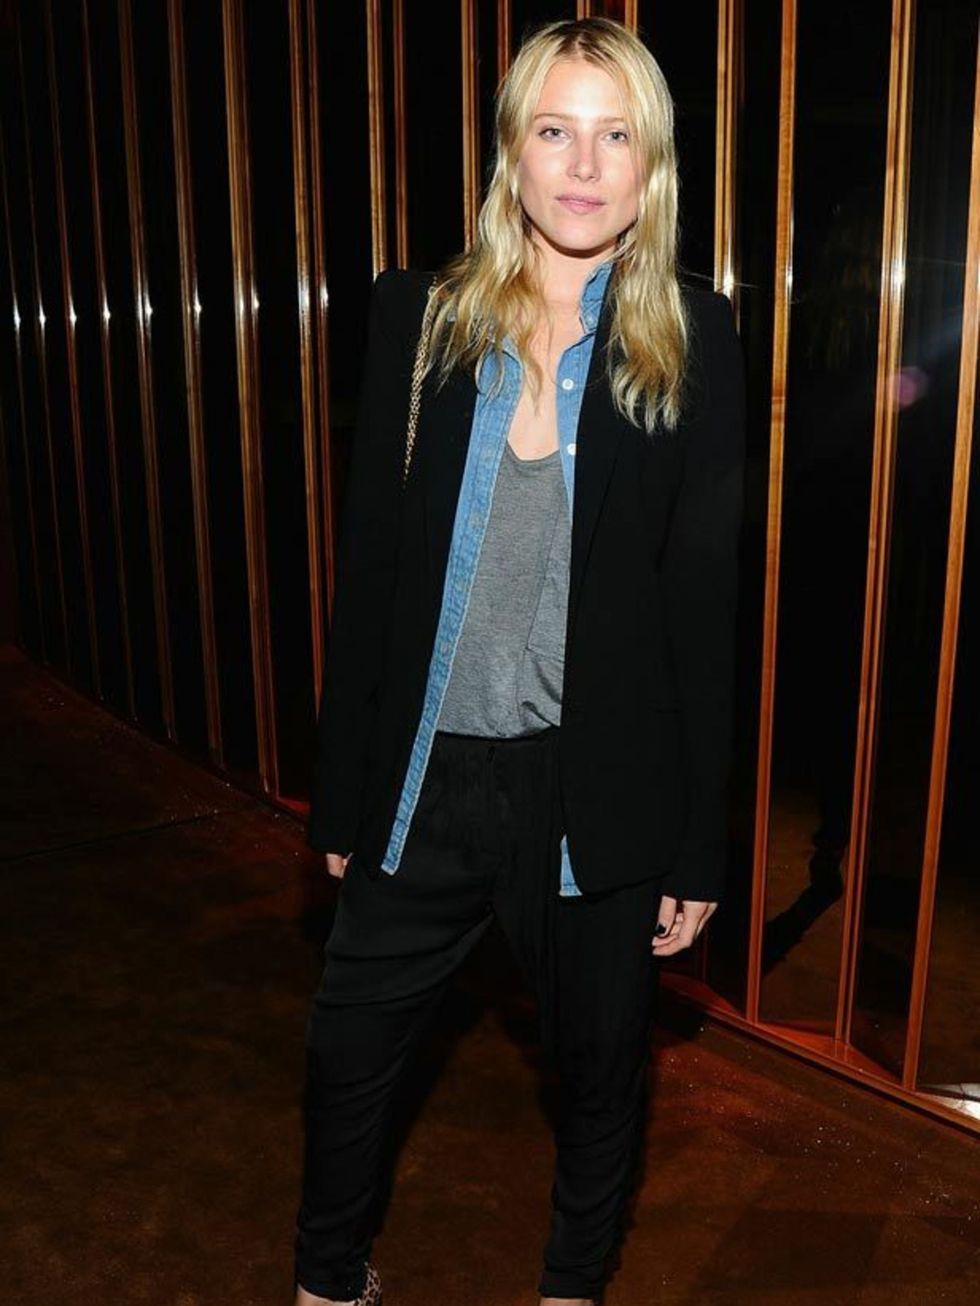 <p>Dree Hemingway &amp; <a href="http://www.elleuk.com/catwalk/collections/calvin-klein-collection/autumn-winter-2011/review">Calvin Klein</a>'s Italo Zucchelli at The Met Ball, 2 May 2011 in New York.</p>